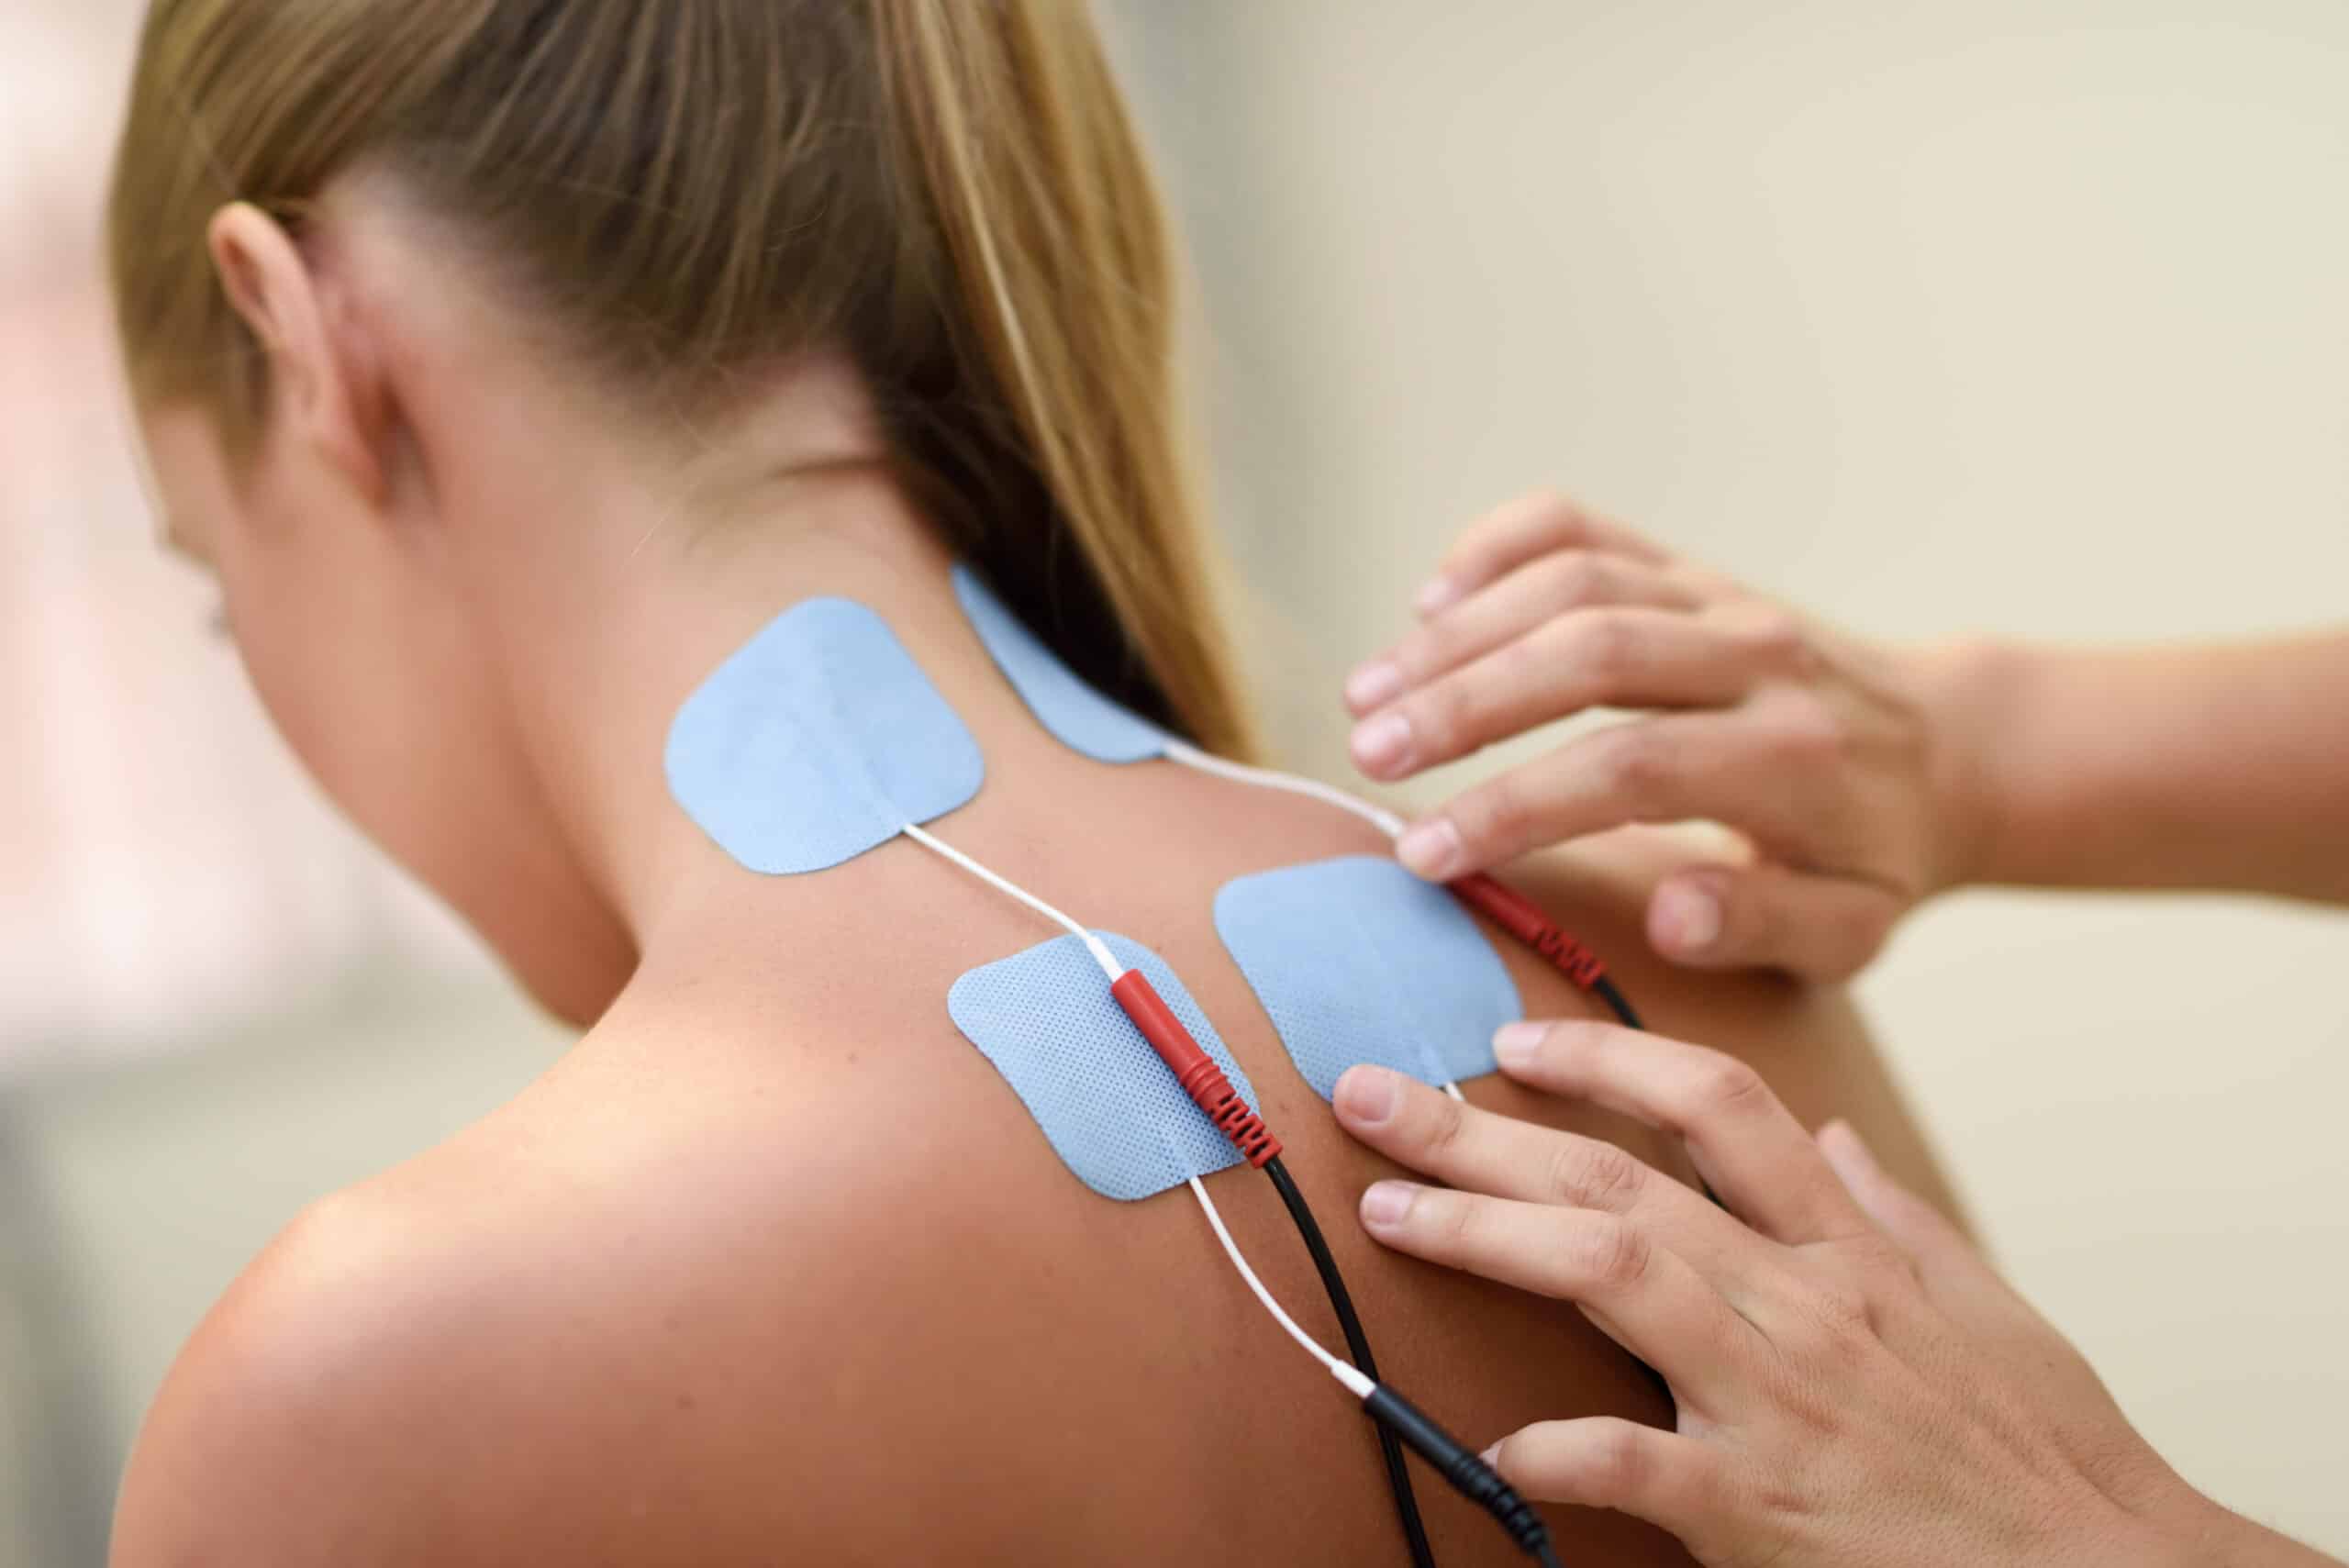 A woman is getting an electrical treatment on her back.